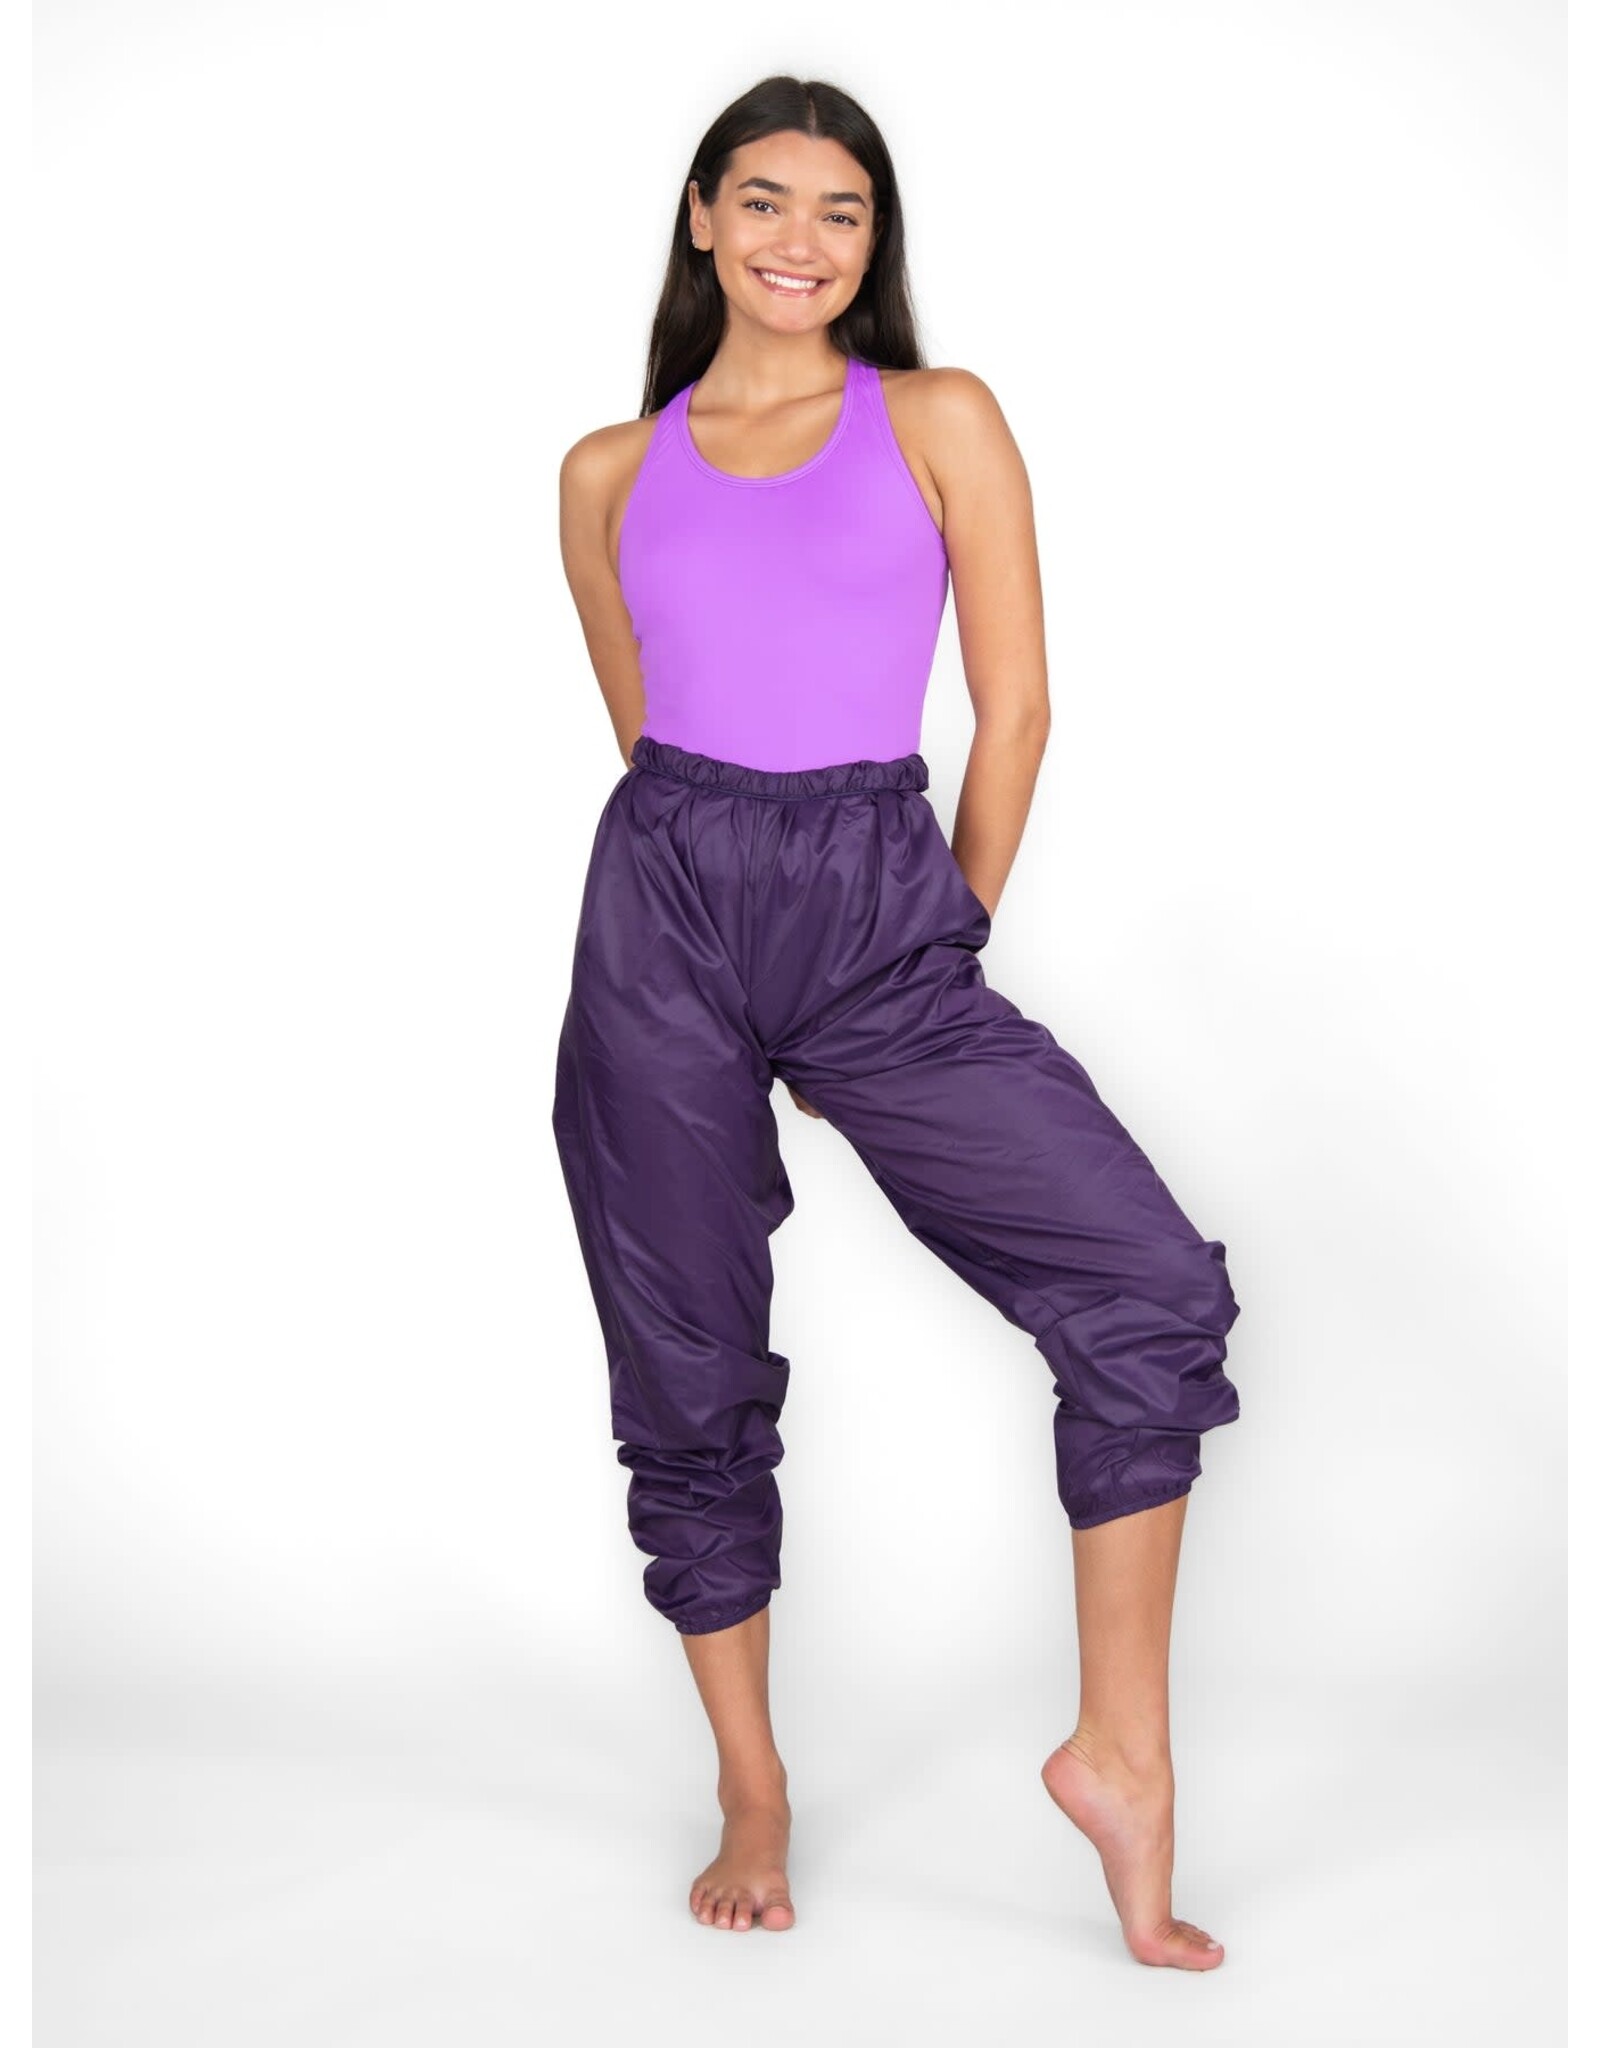 Body Wrappers Ripstop Pants (701)